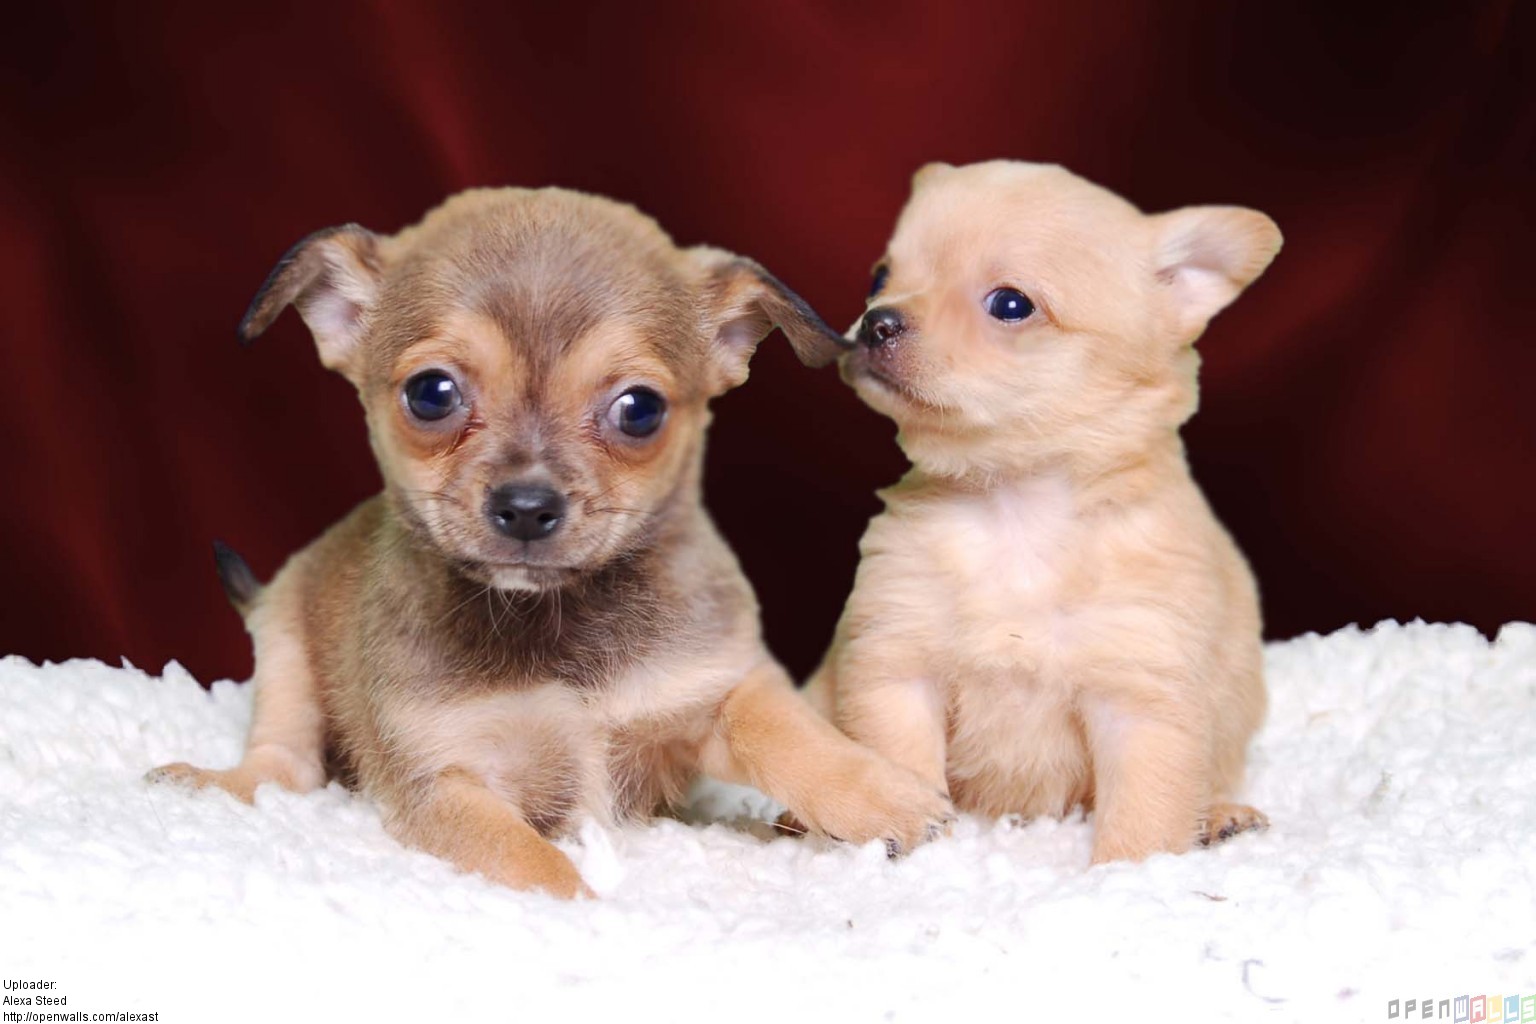 Alexast Licence Category Creatures Tags Chihuahua Puppies Puppy Dogs